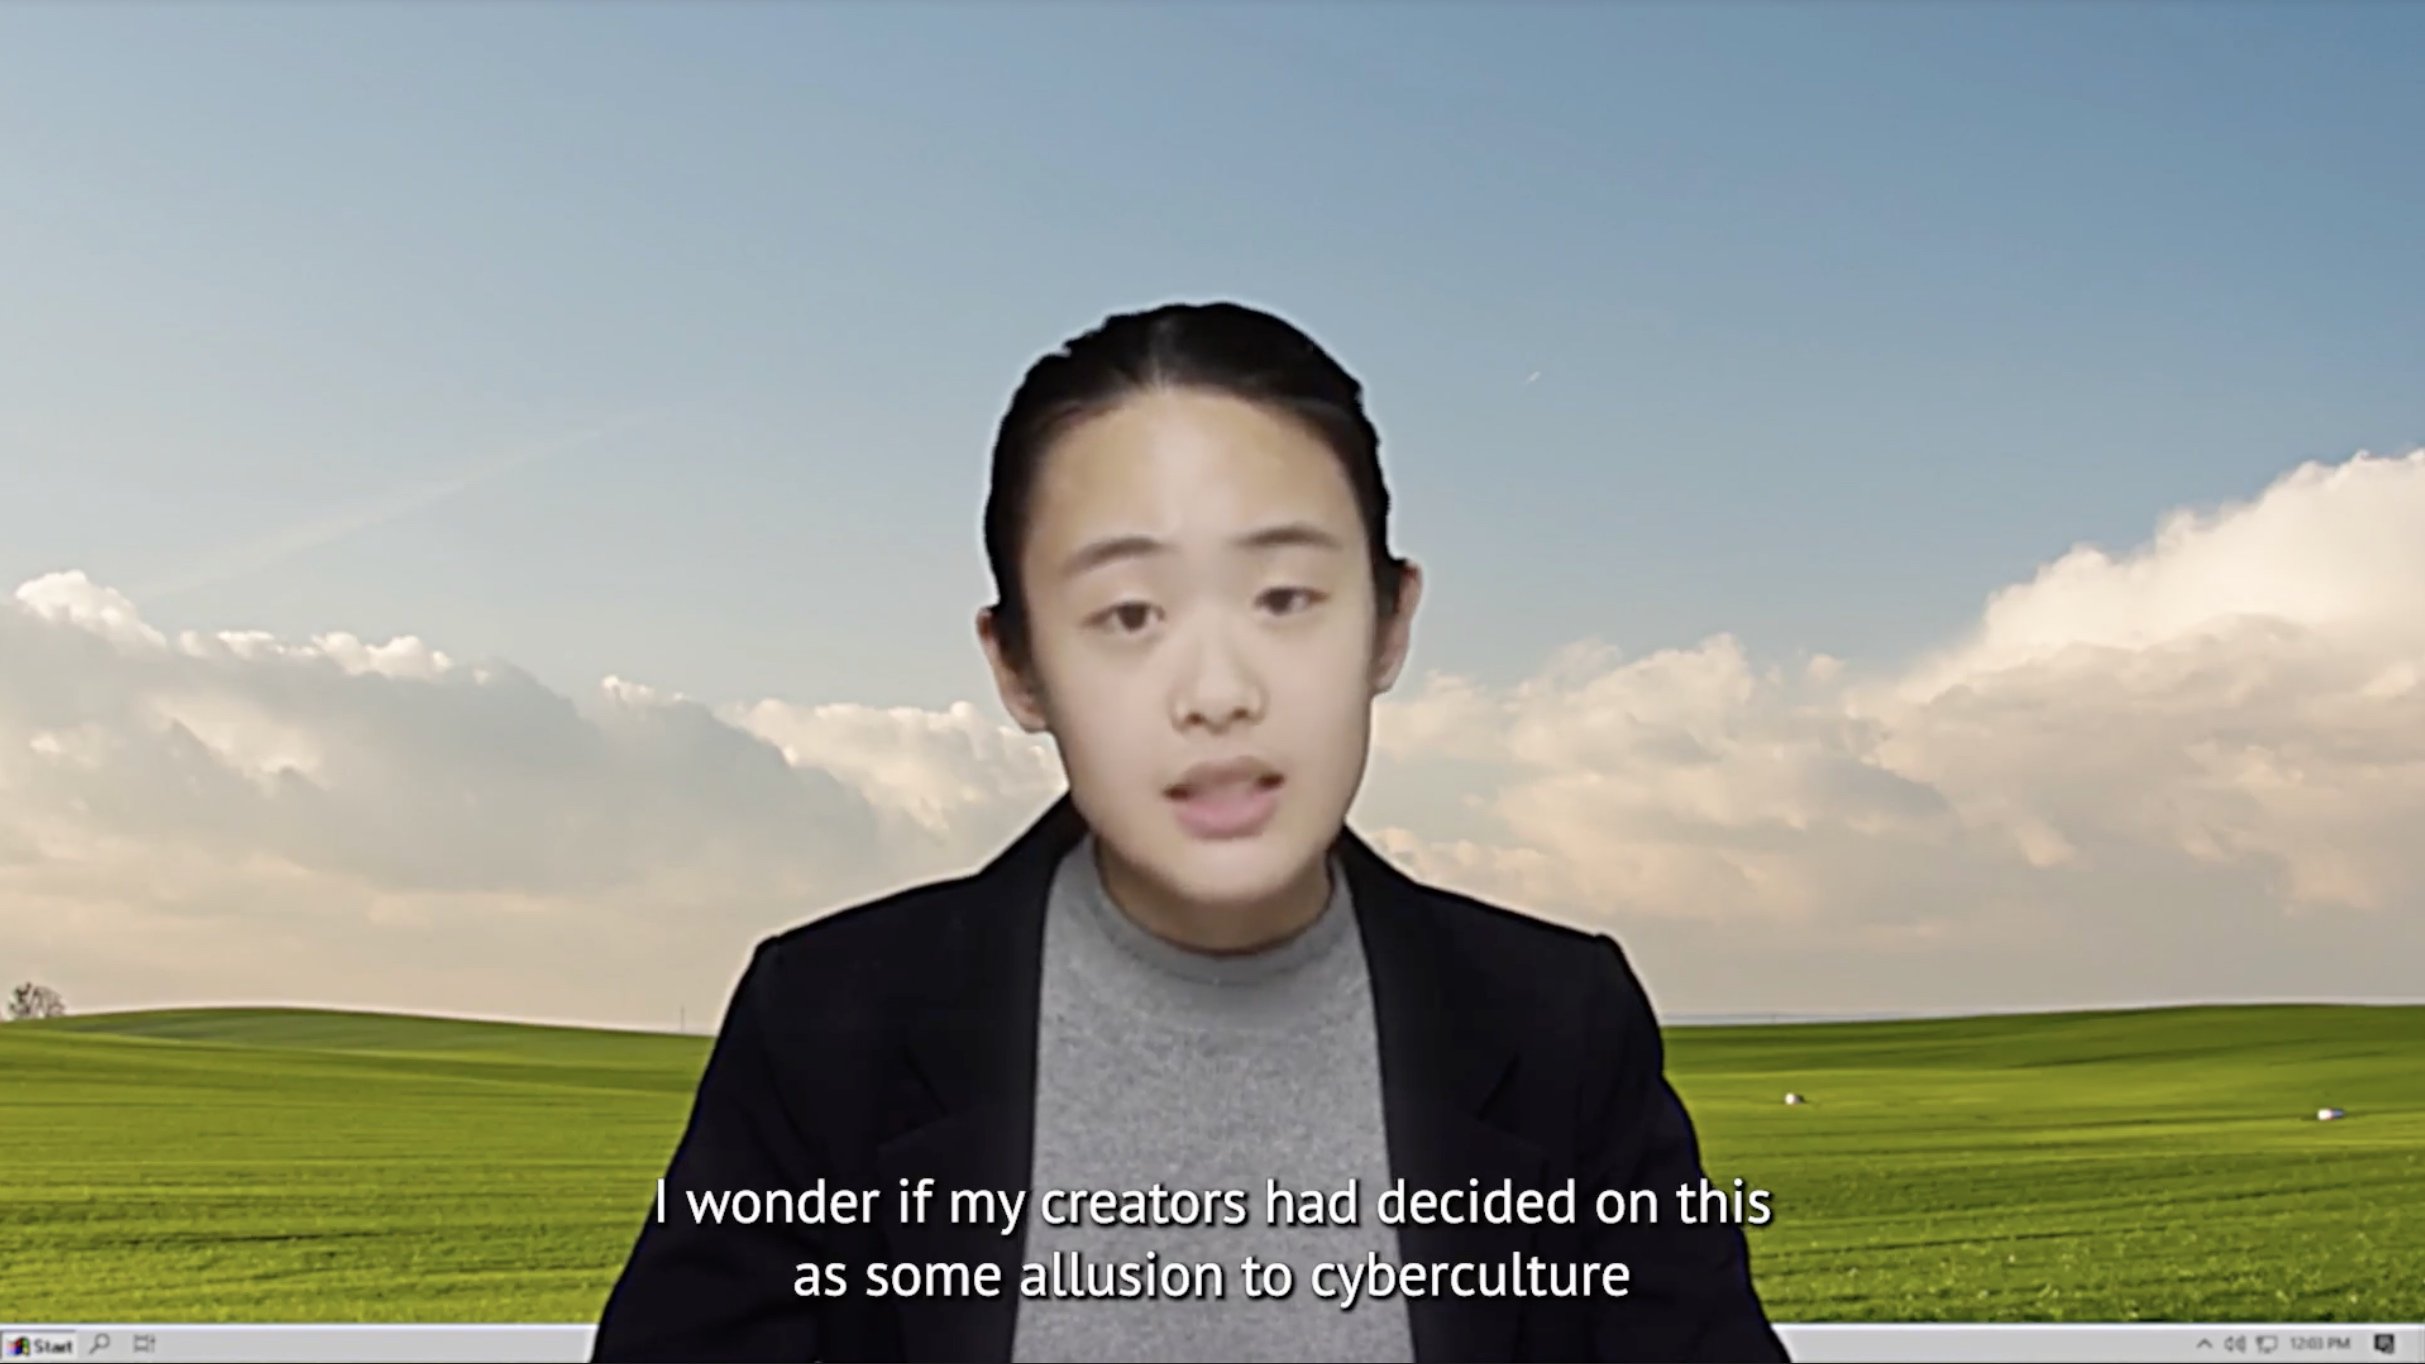 an asian woman wearing a black blazer and gray shirt sits on a retro browser background with green hills and clouds